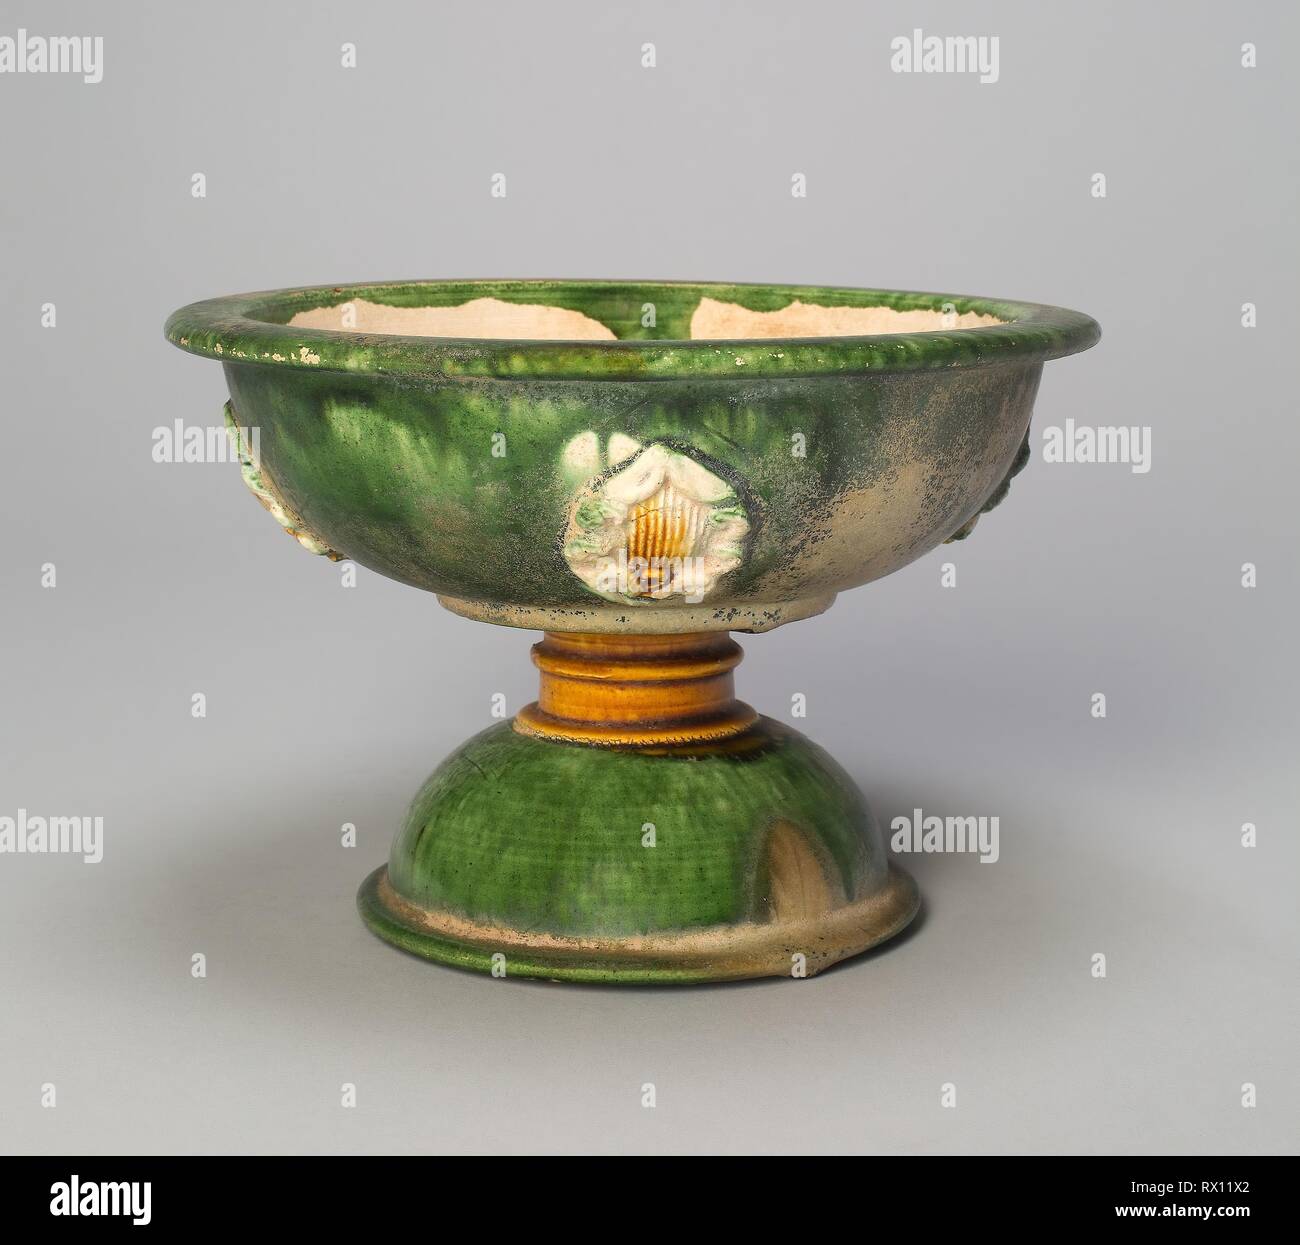 Stem Bowl with Foliate Medallions. China. Date: 700 AD-750 AD. Dimensions: H. 11.9 cm (4 11/16 in.); diam. 18.0 cm (7 1/16 in.). Earthenware with three color (sancai) lead glazes and underglaze molded decoration. Origin: China. Museum: The Chicago Art Institute. Stock Photo